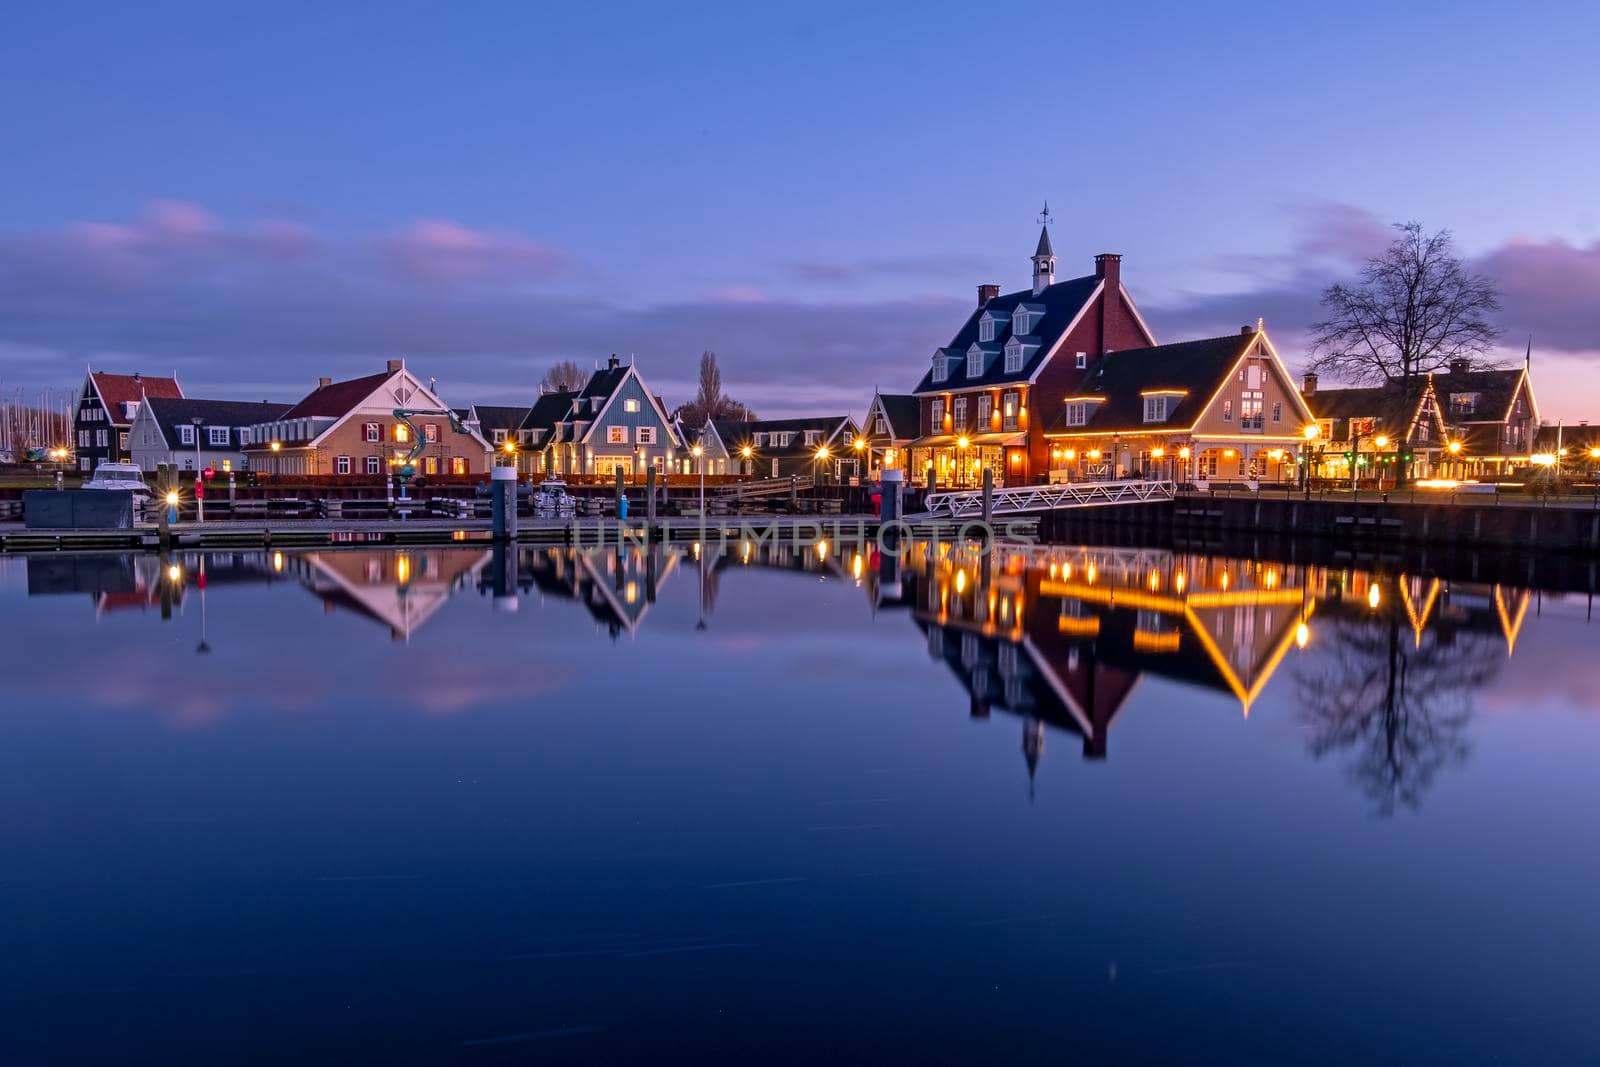 The harbor from Huizen in the Netherlands at sunset